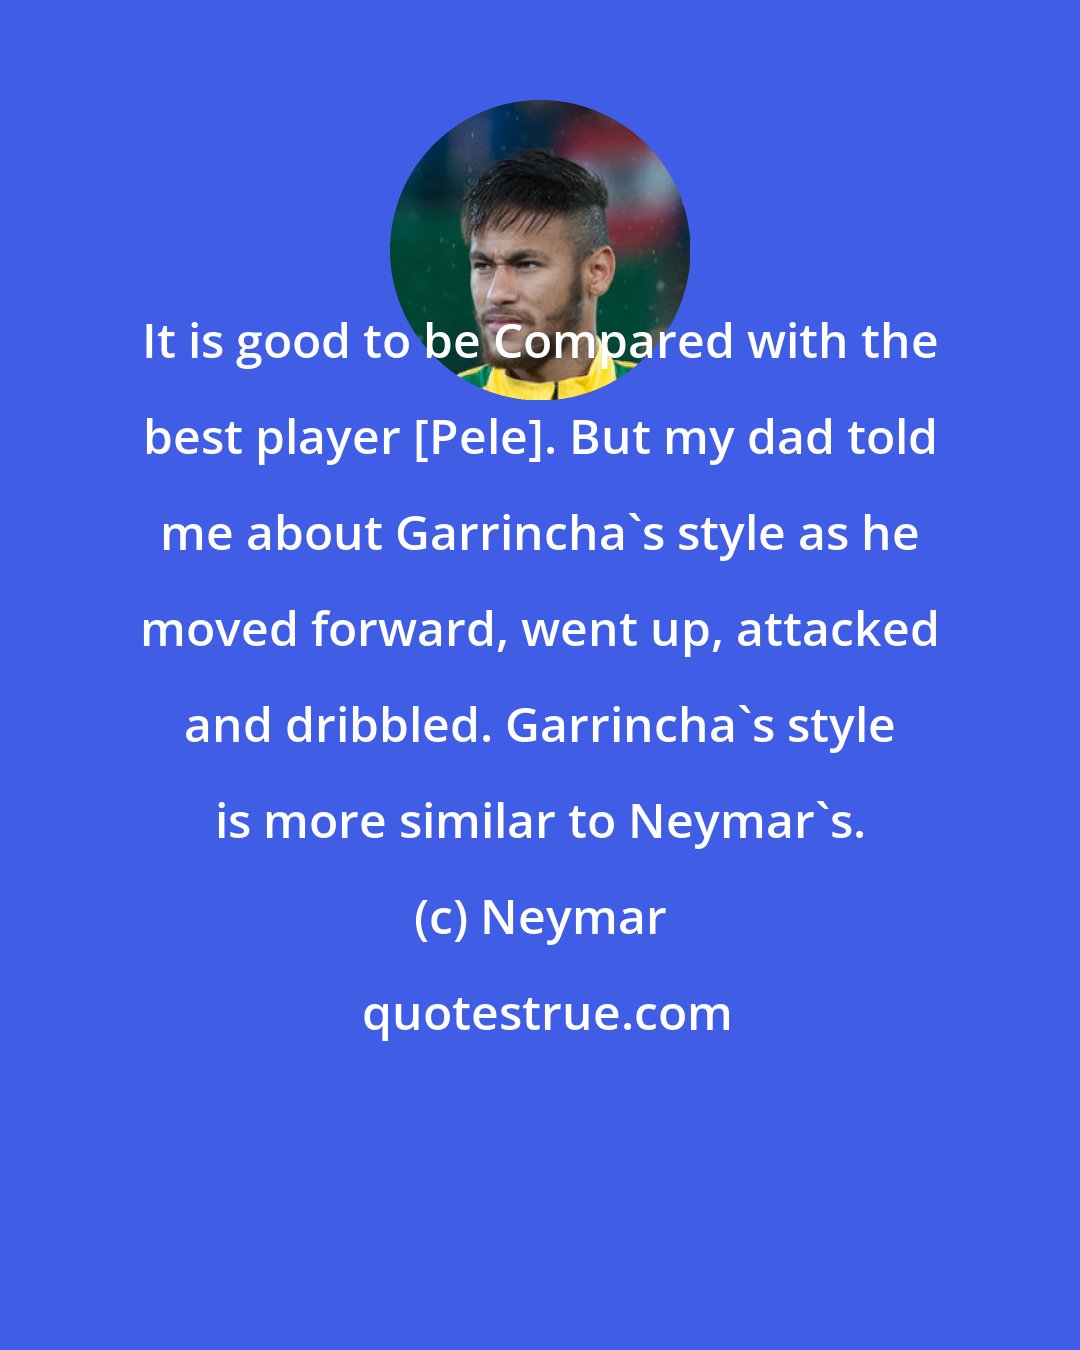 Neymar: It is good to be Compared with the best player [Pele]. But my dad told me about Garrincha's style as he moved forward, went up, attacked and dribbled. Garrincha's style is more similar to Neymar's.